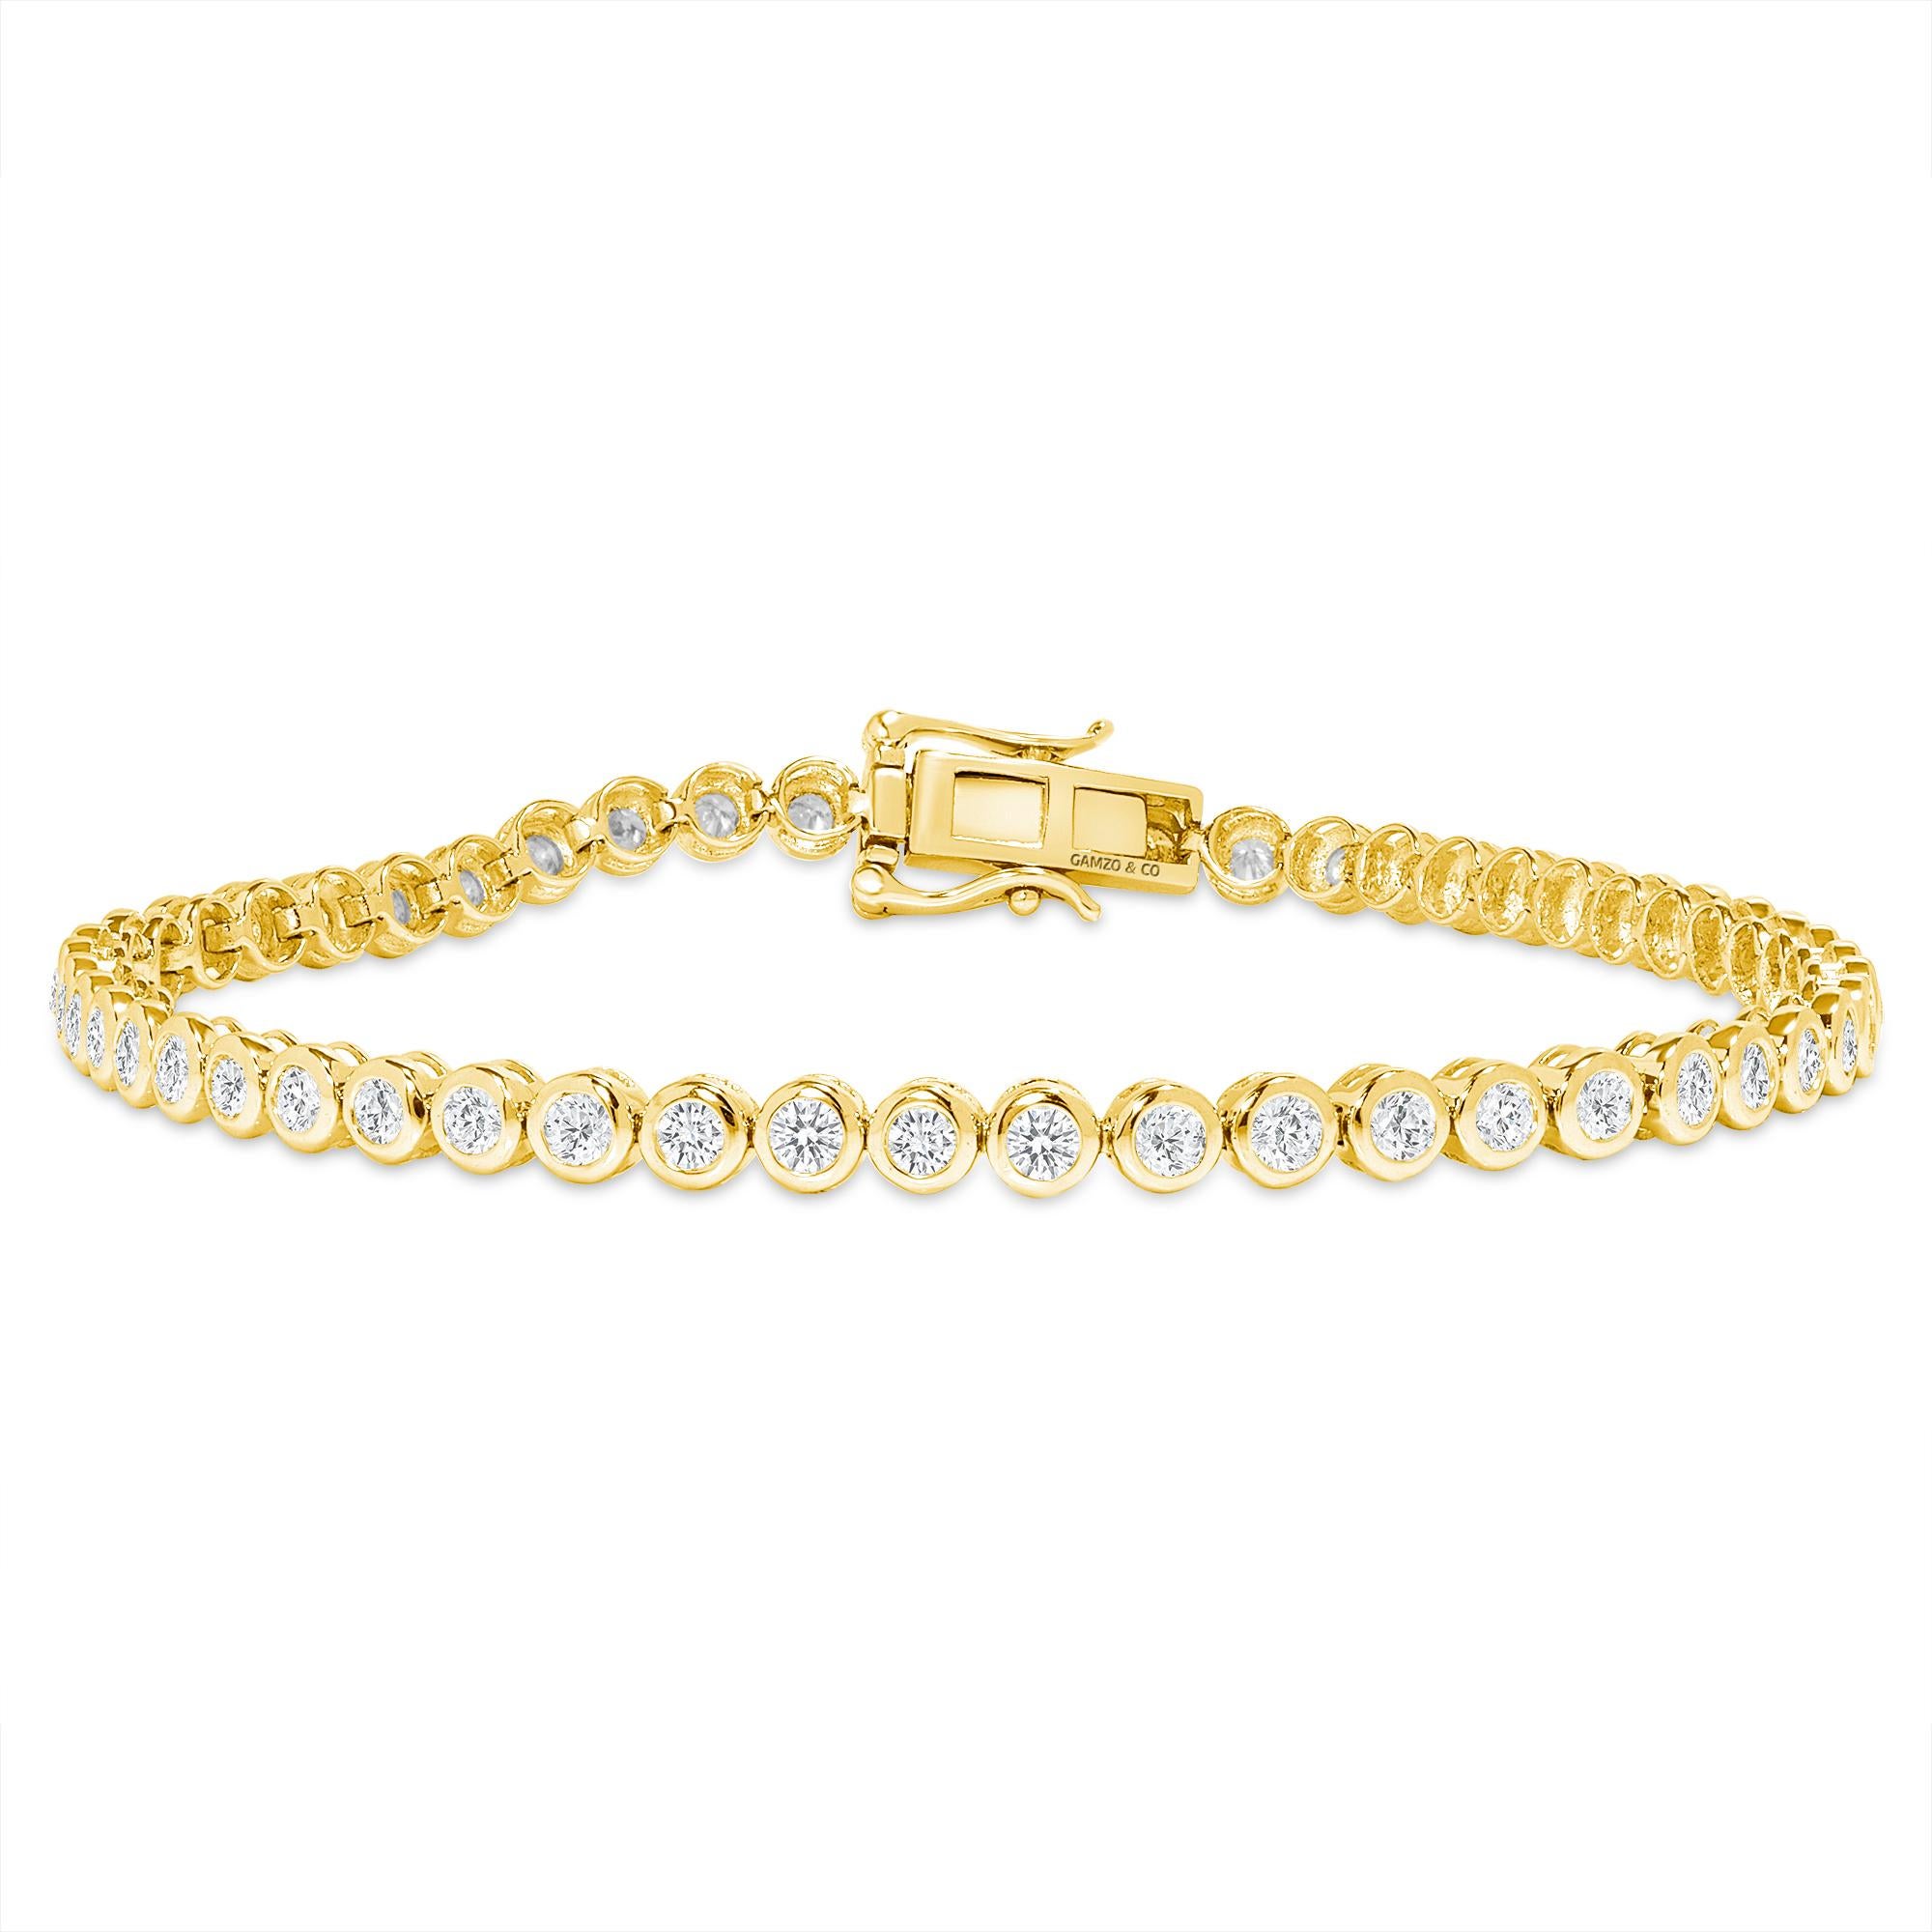 These beautiful round diamonds dance around your wrist as they absorb light and attention.
Metal: 14k Gold
Diamond Cut: Round
Diamond Total Carats: 5ct
Diamond Clarity: VS
Diamond Color: F
Color: Yellow Gold
Bracelet Length: 6.5 Inches 
Included